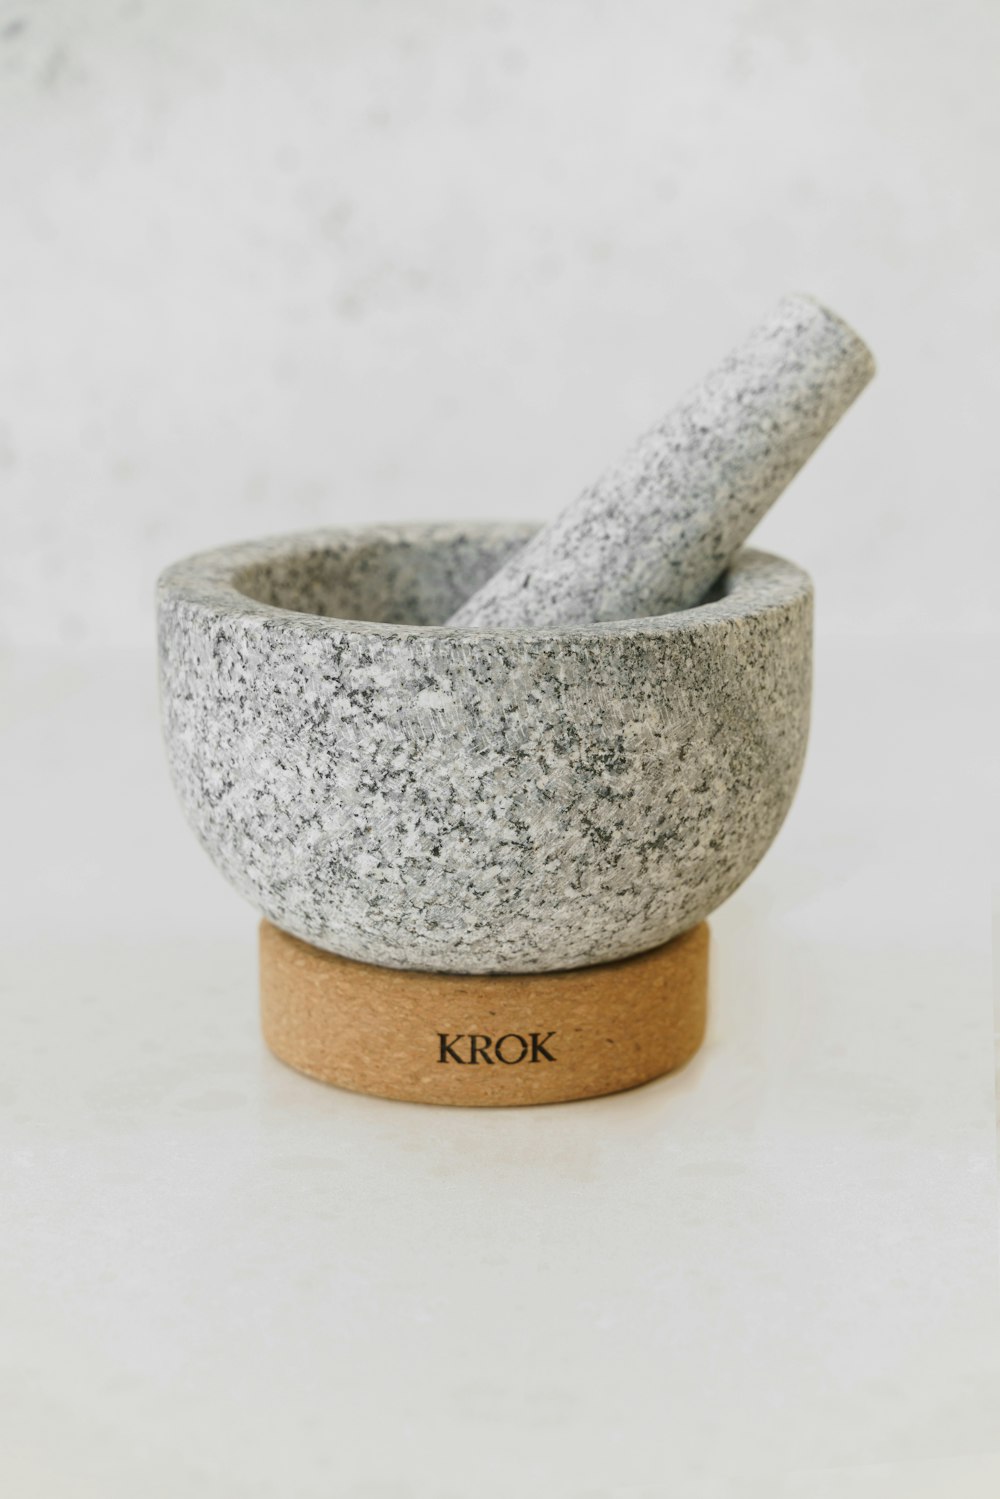 a mortar and pestle set on a white surface